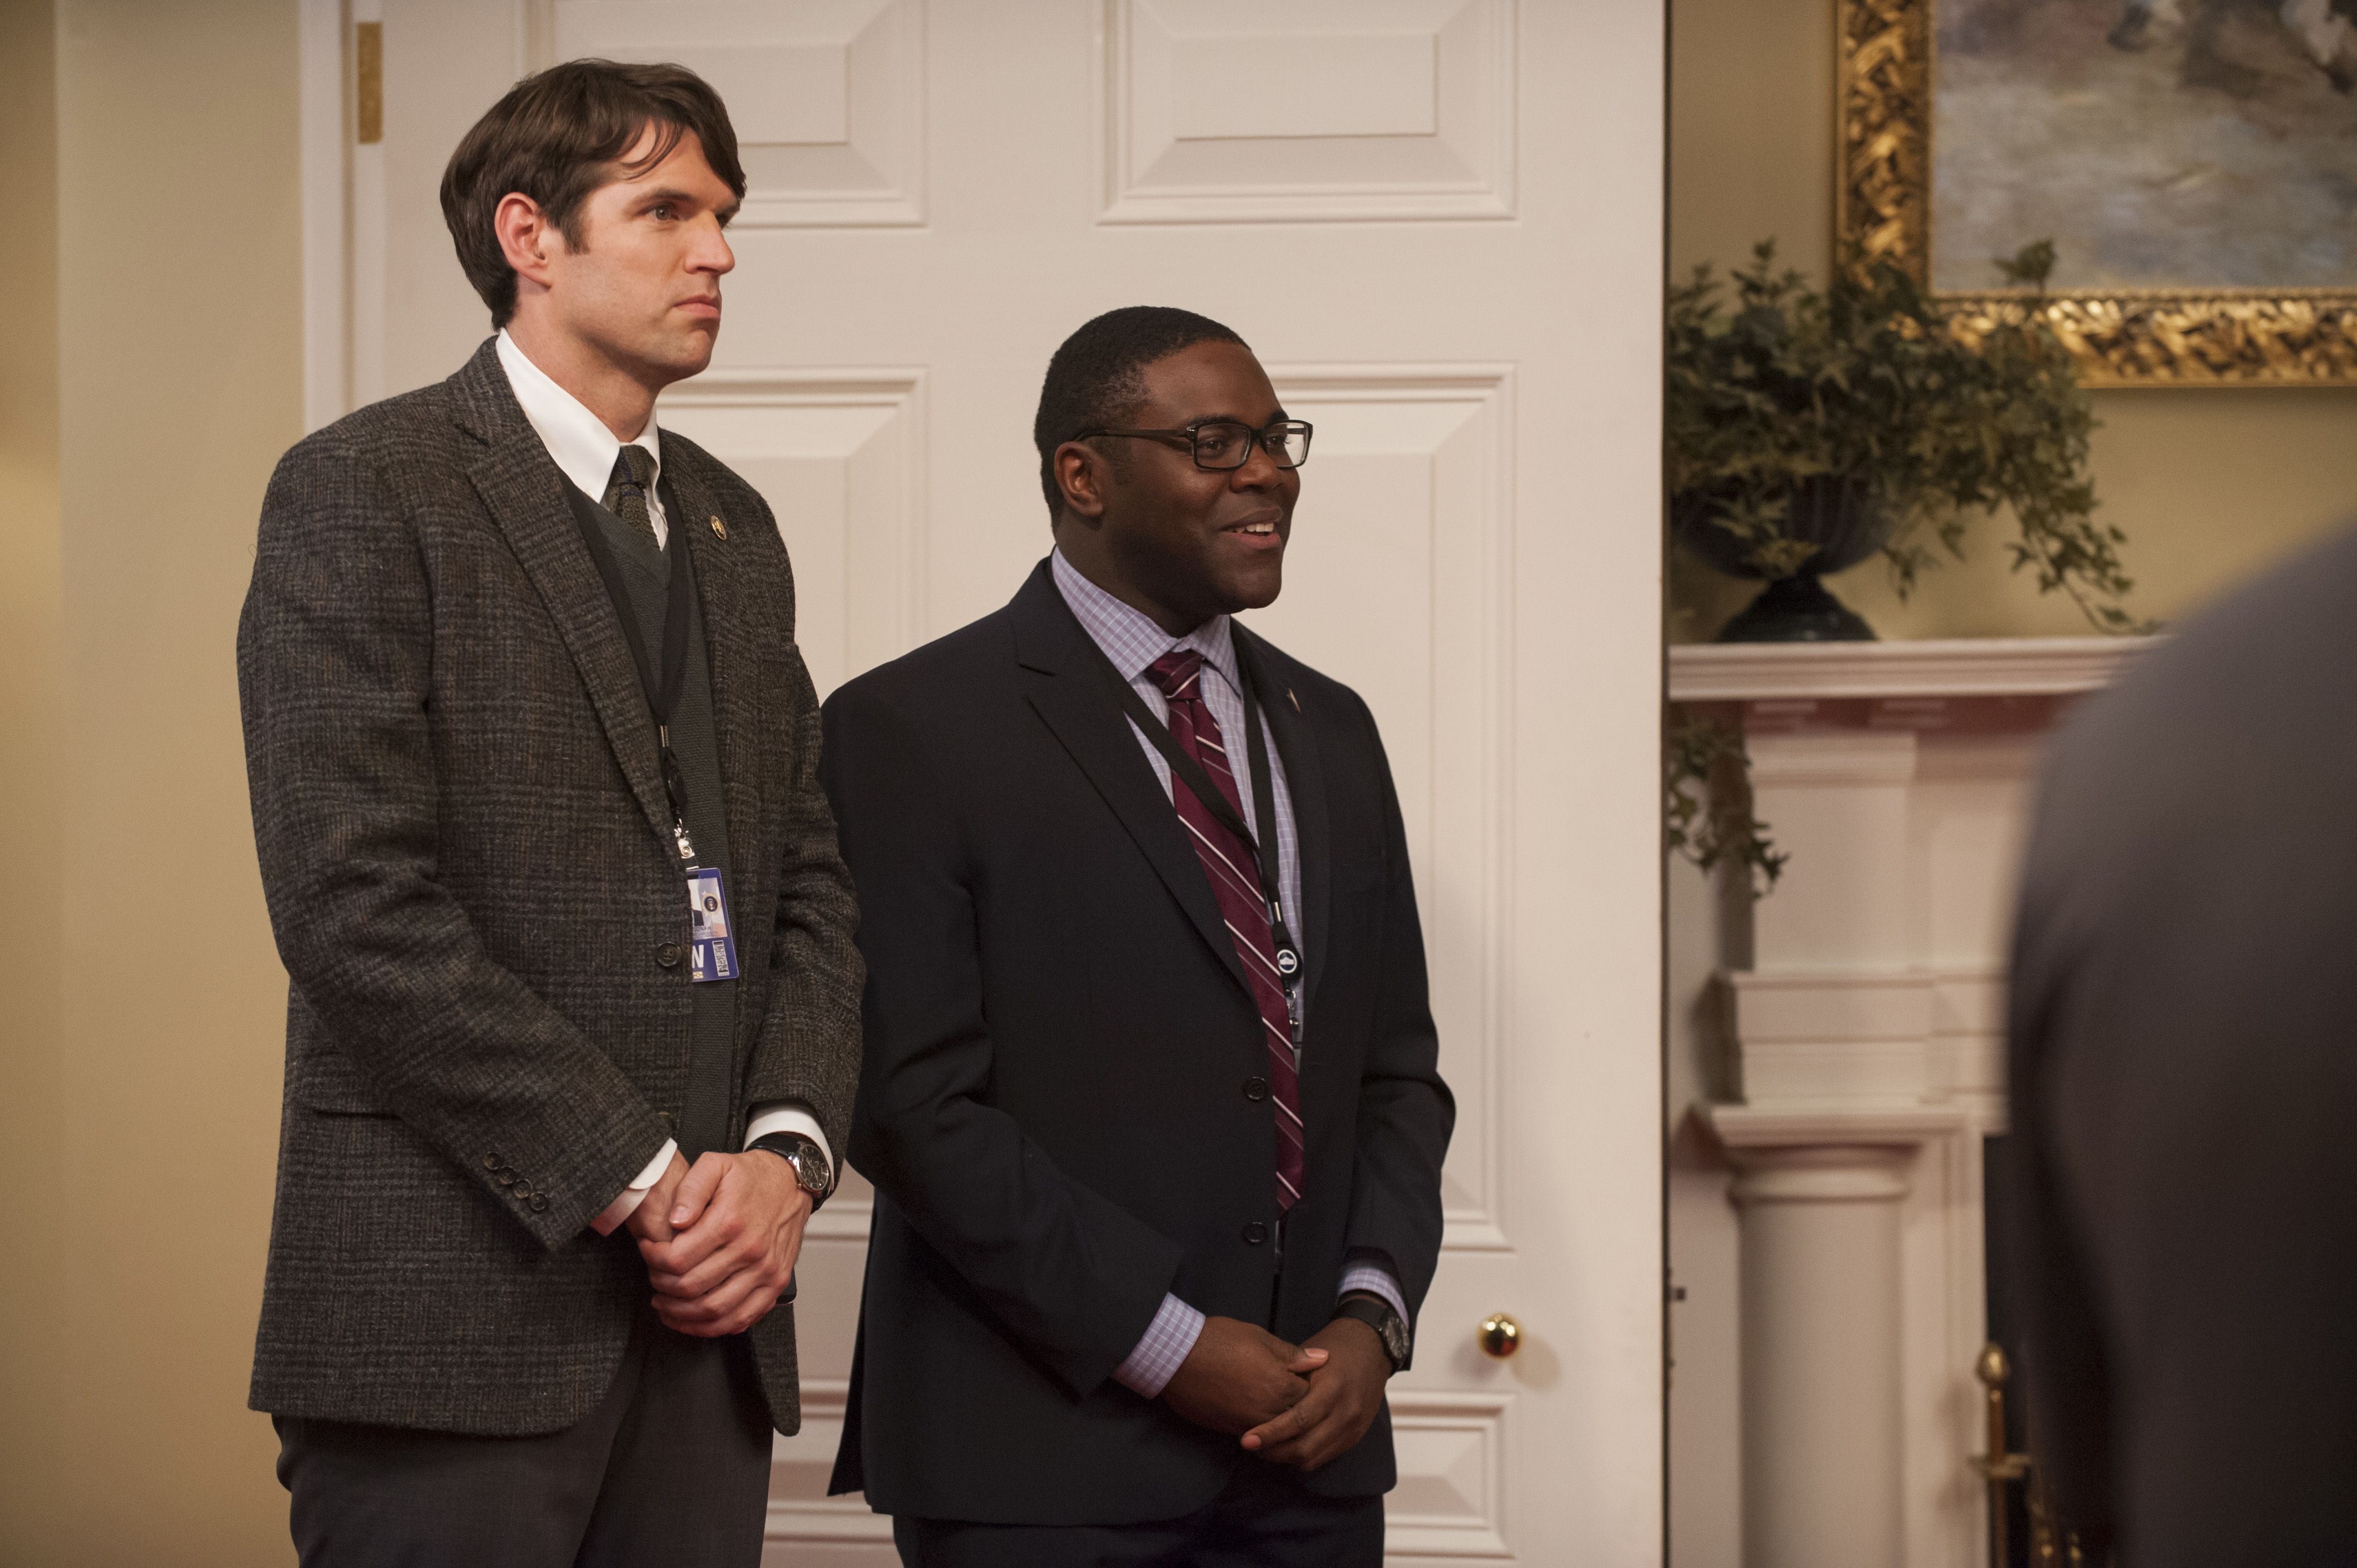 Veep Season 5 Review: HBO's Excellent Satire Is Too Real | Collider